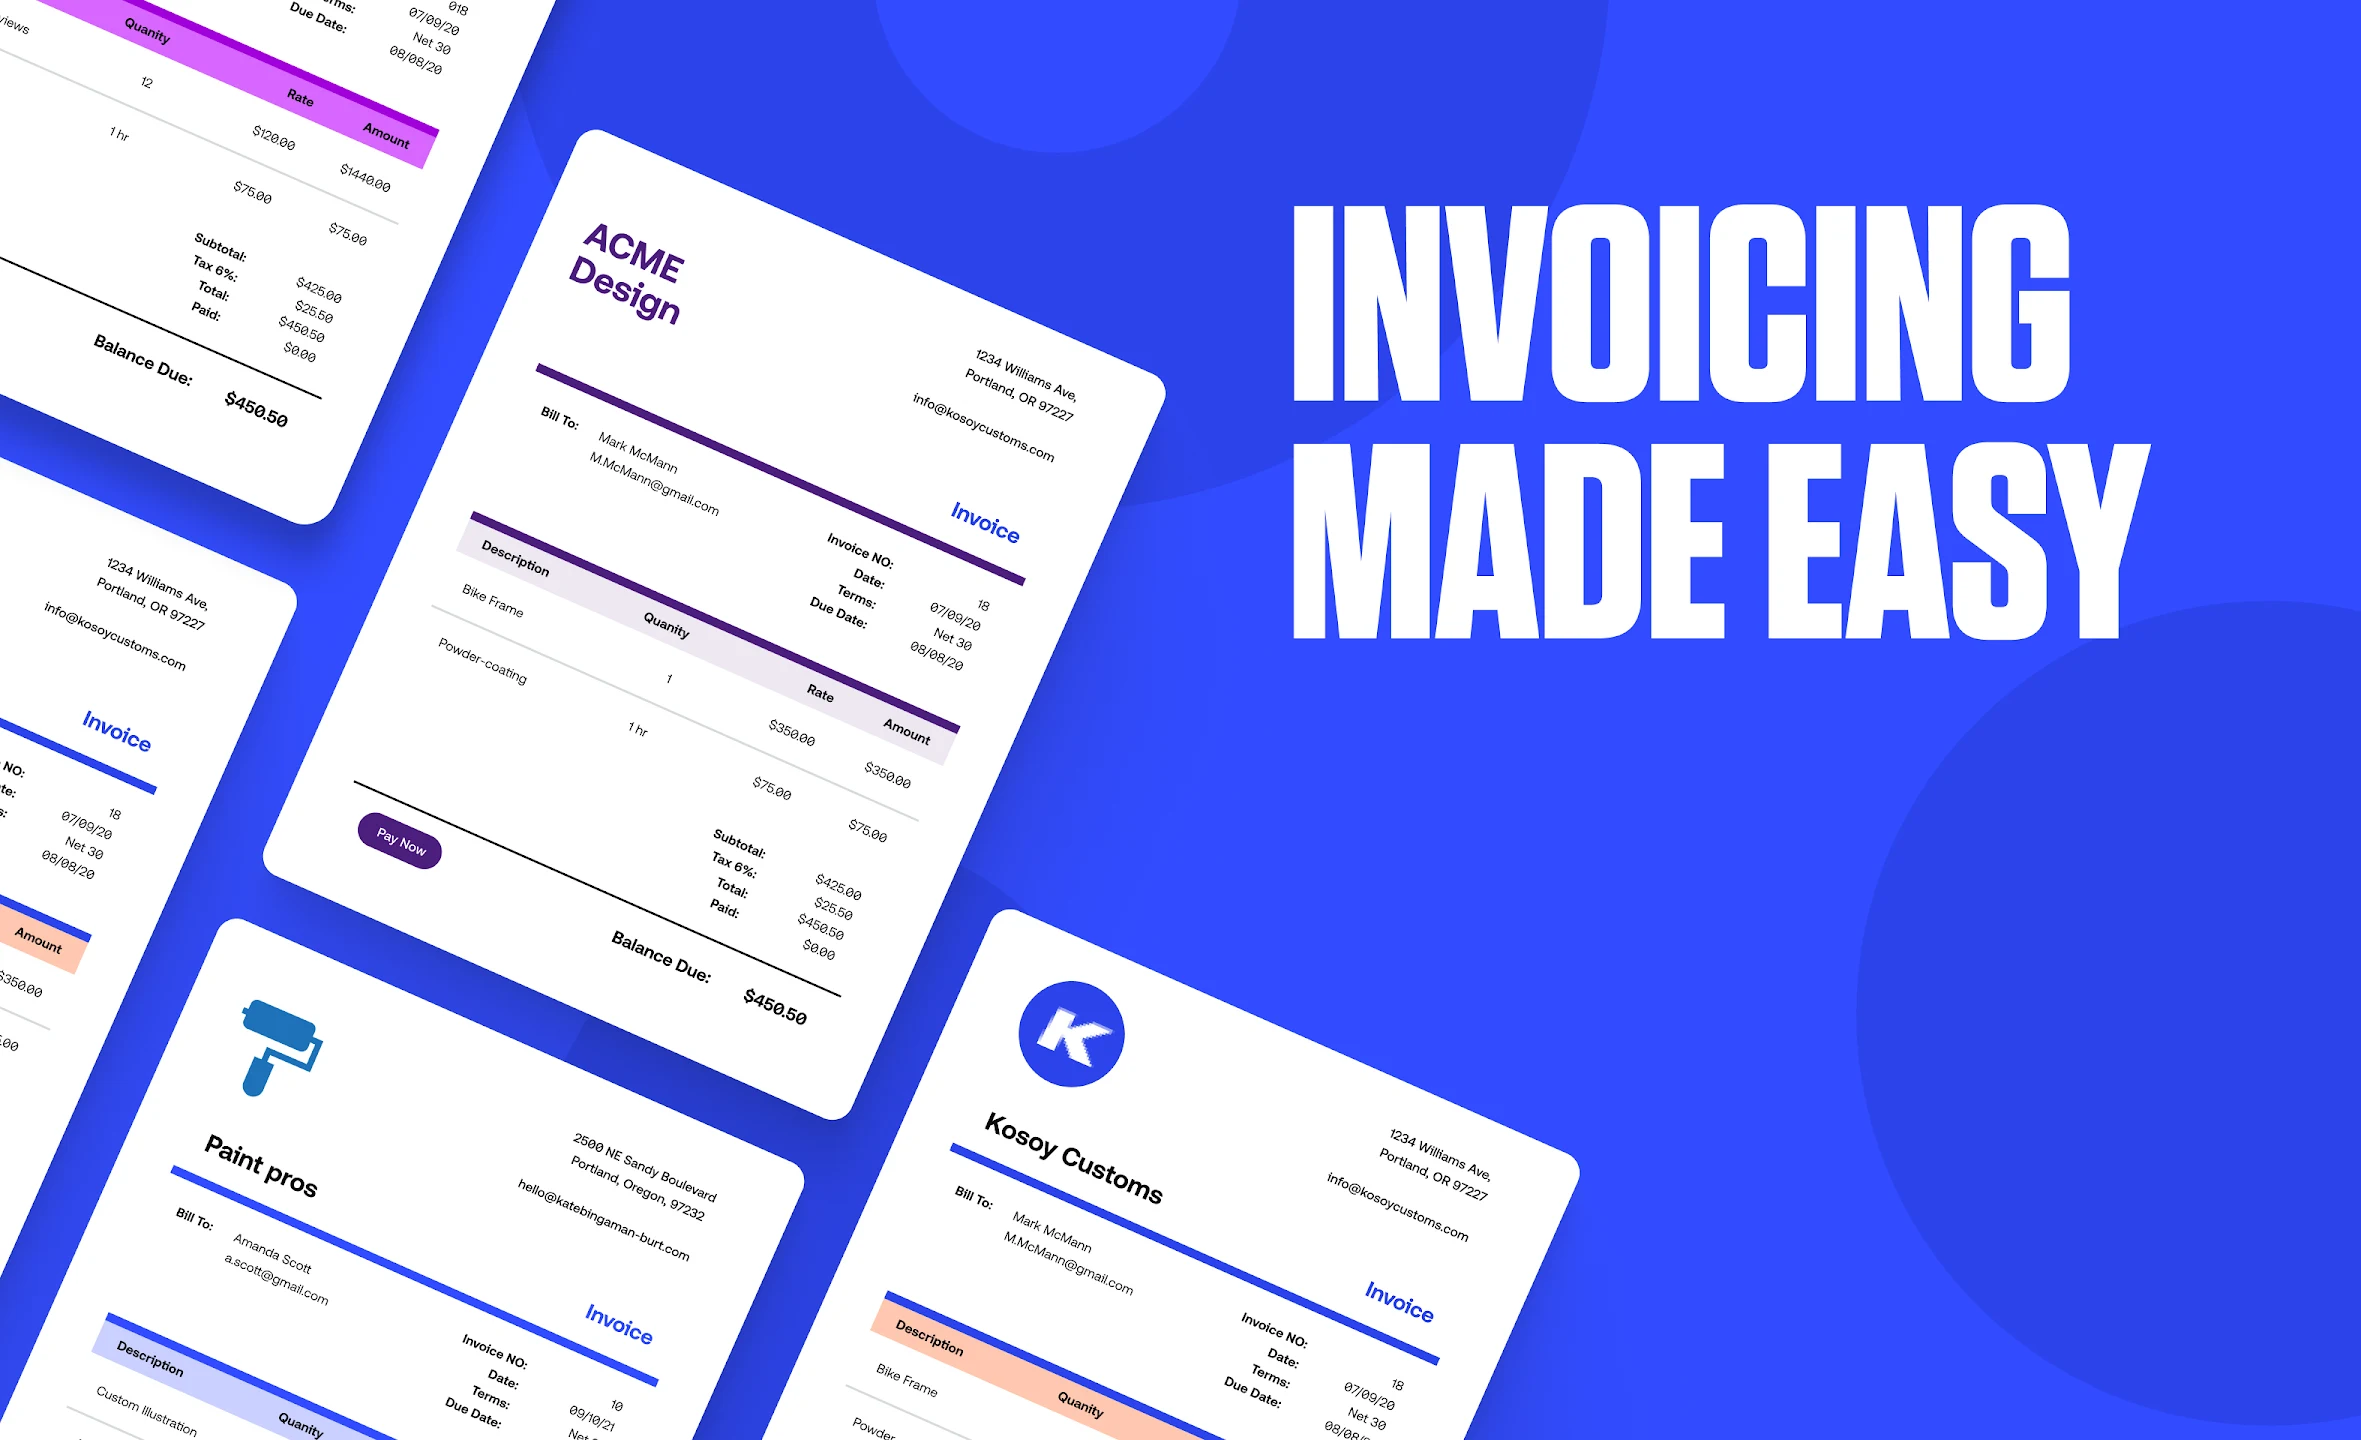 Invoice2go for pc free download music teacher resume free download